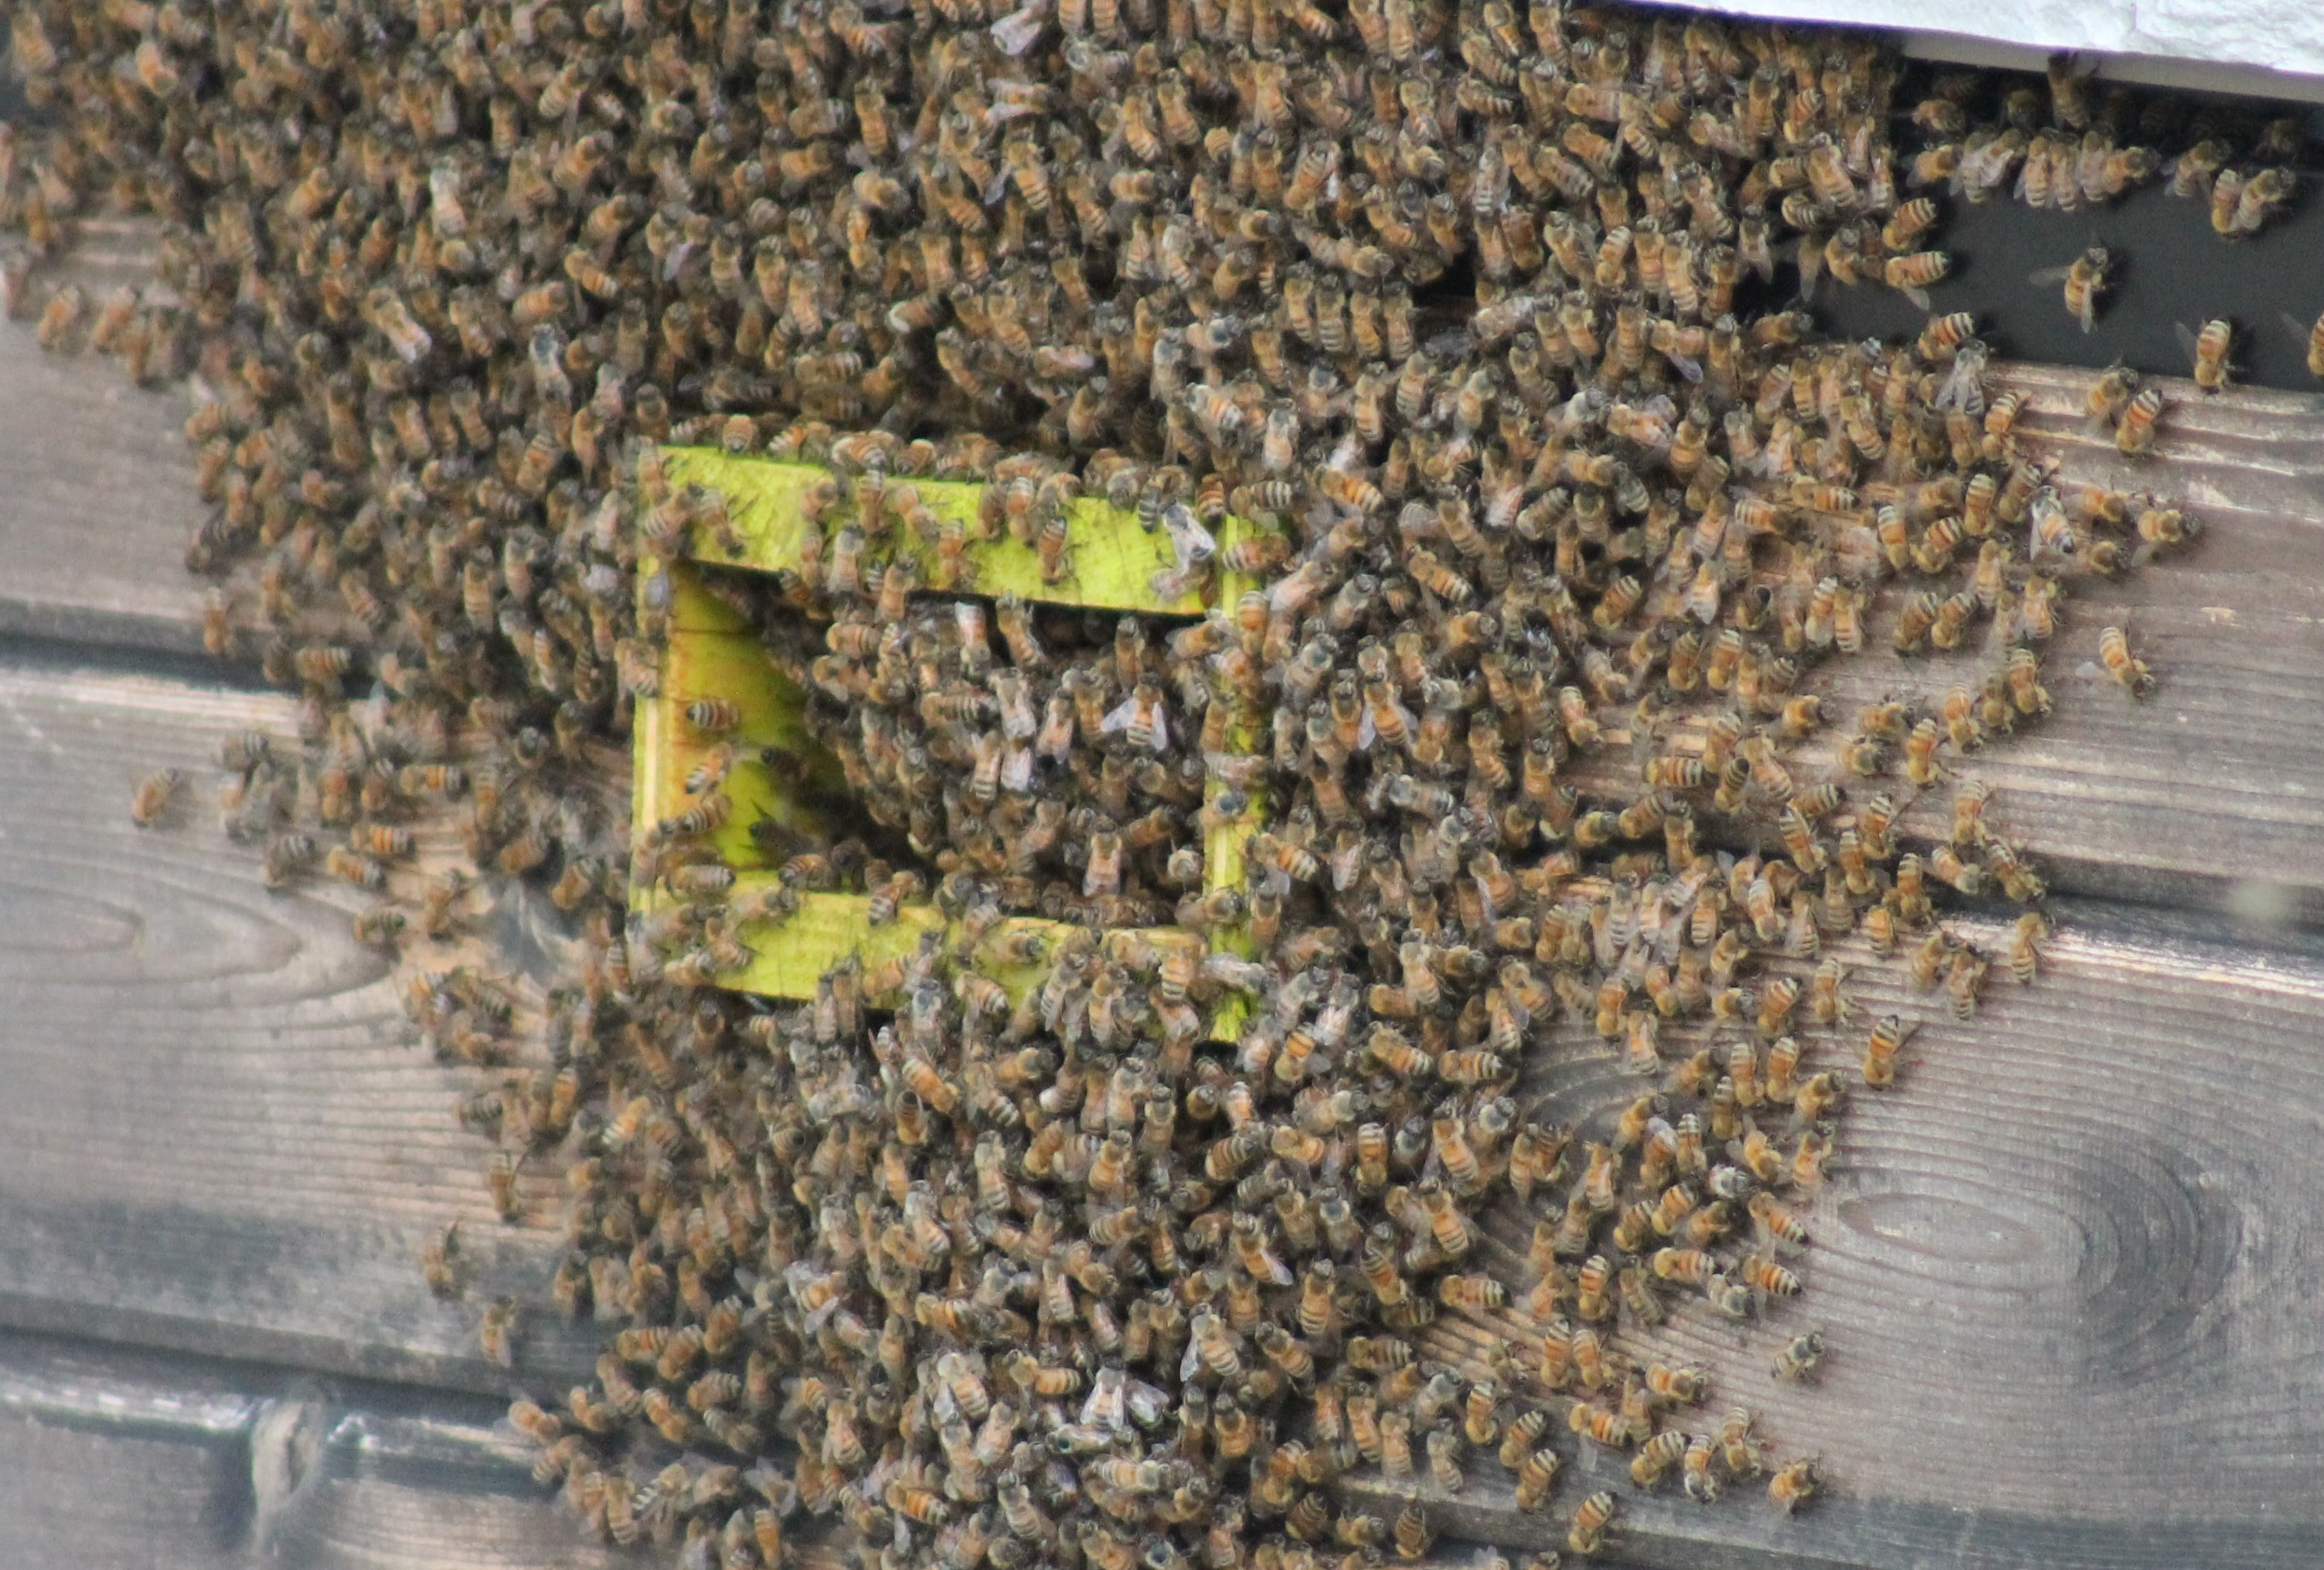 Bees feston outside the hives or in open spaces prior to swarming